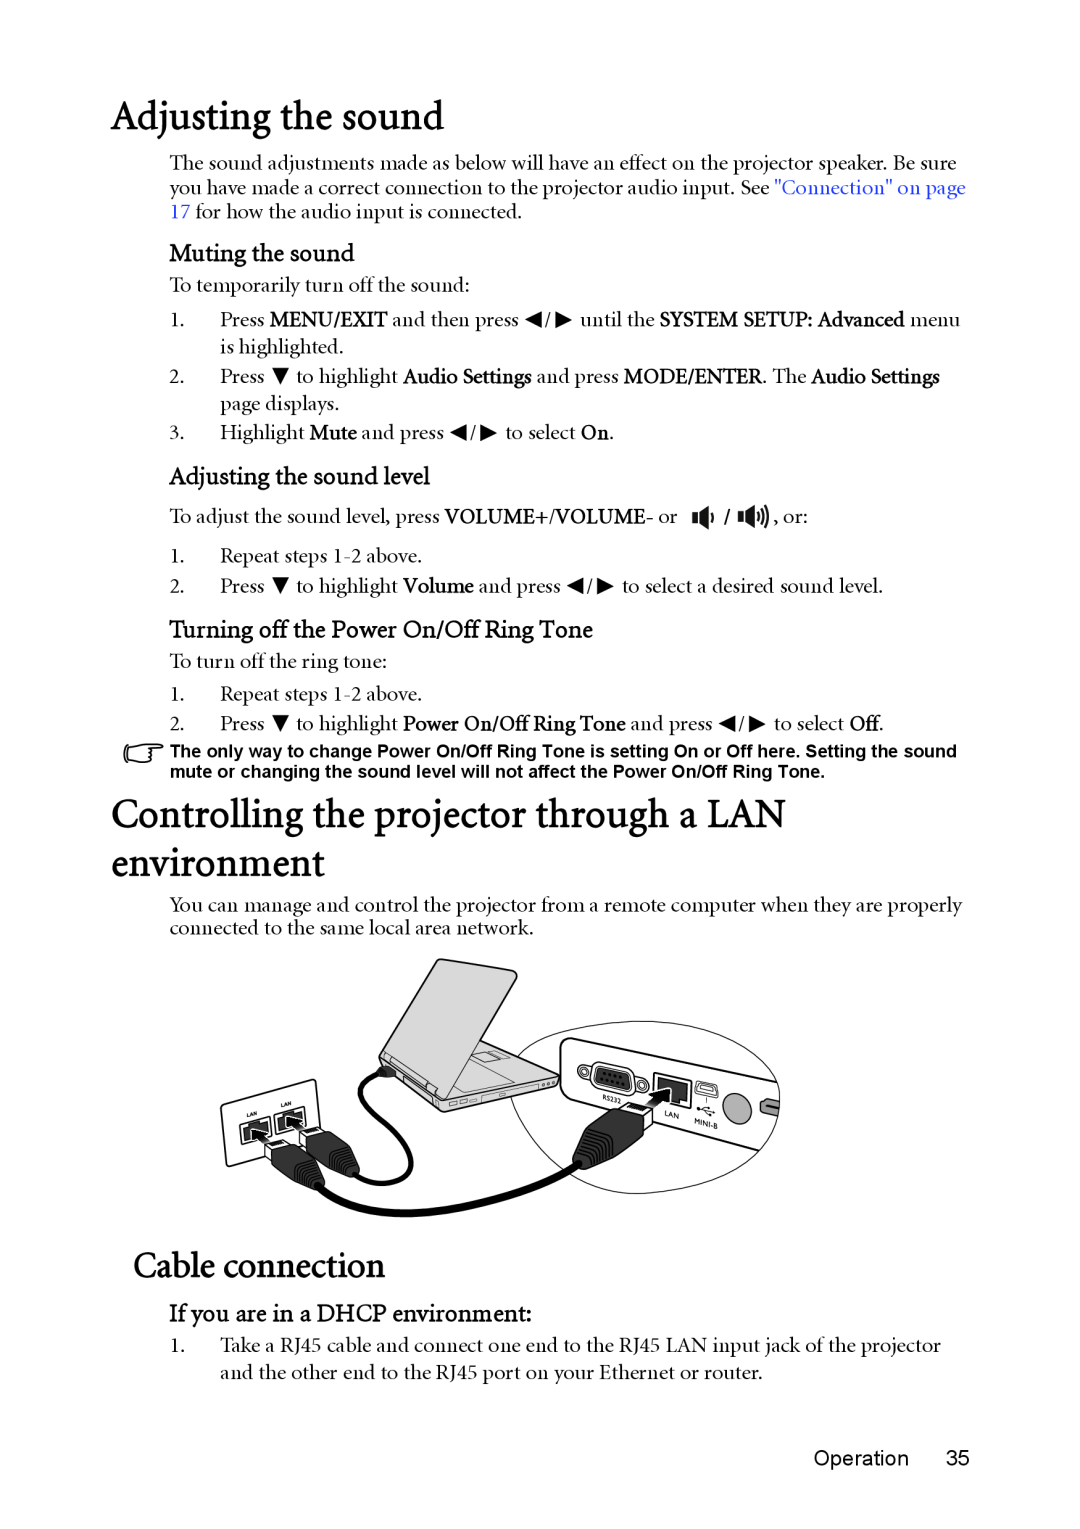 BenQ mw814st user manual Adjusting the sound, Controlling the projector through a LAN environment, Cable connection 